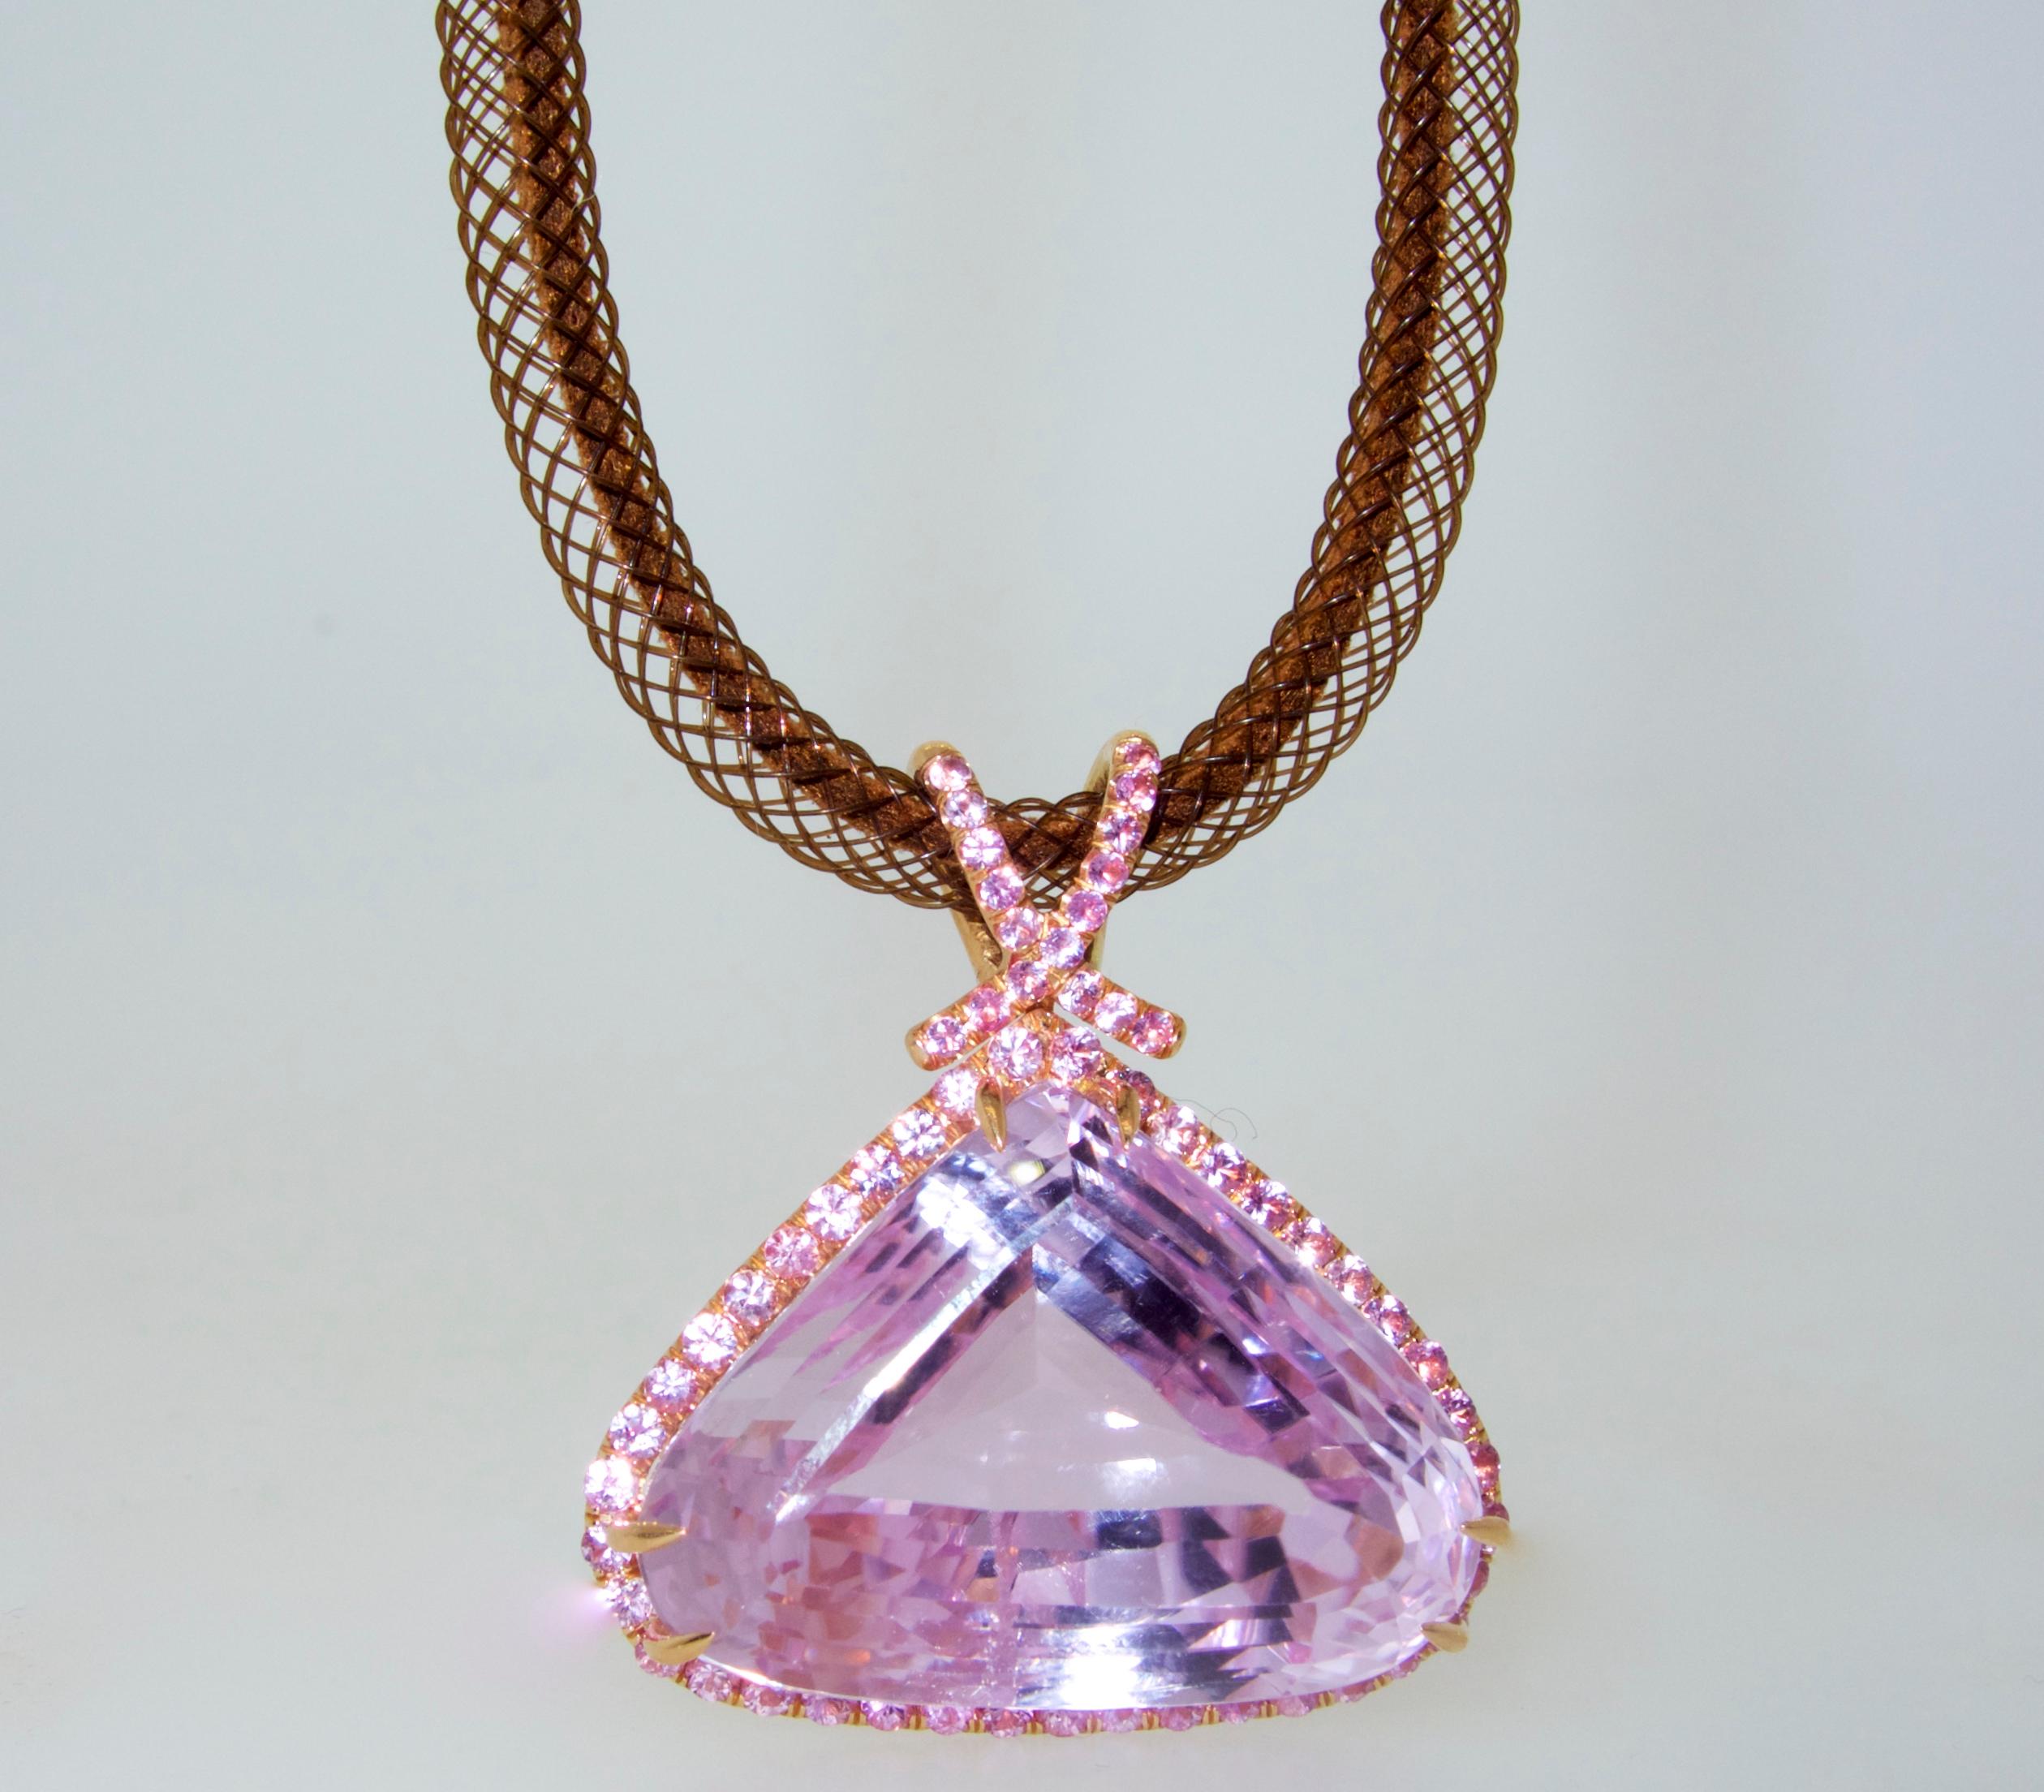 Kunzite, natural and  of very fine quality - as evident of the bright vivid and  strong pink color (with a very slight undertone of lavender).    This center stone weighs approximately 55 cts . and has a fancy cut, not windowed, and not a diluted